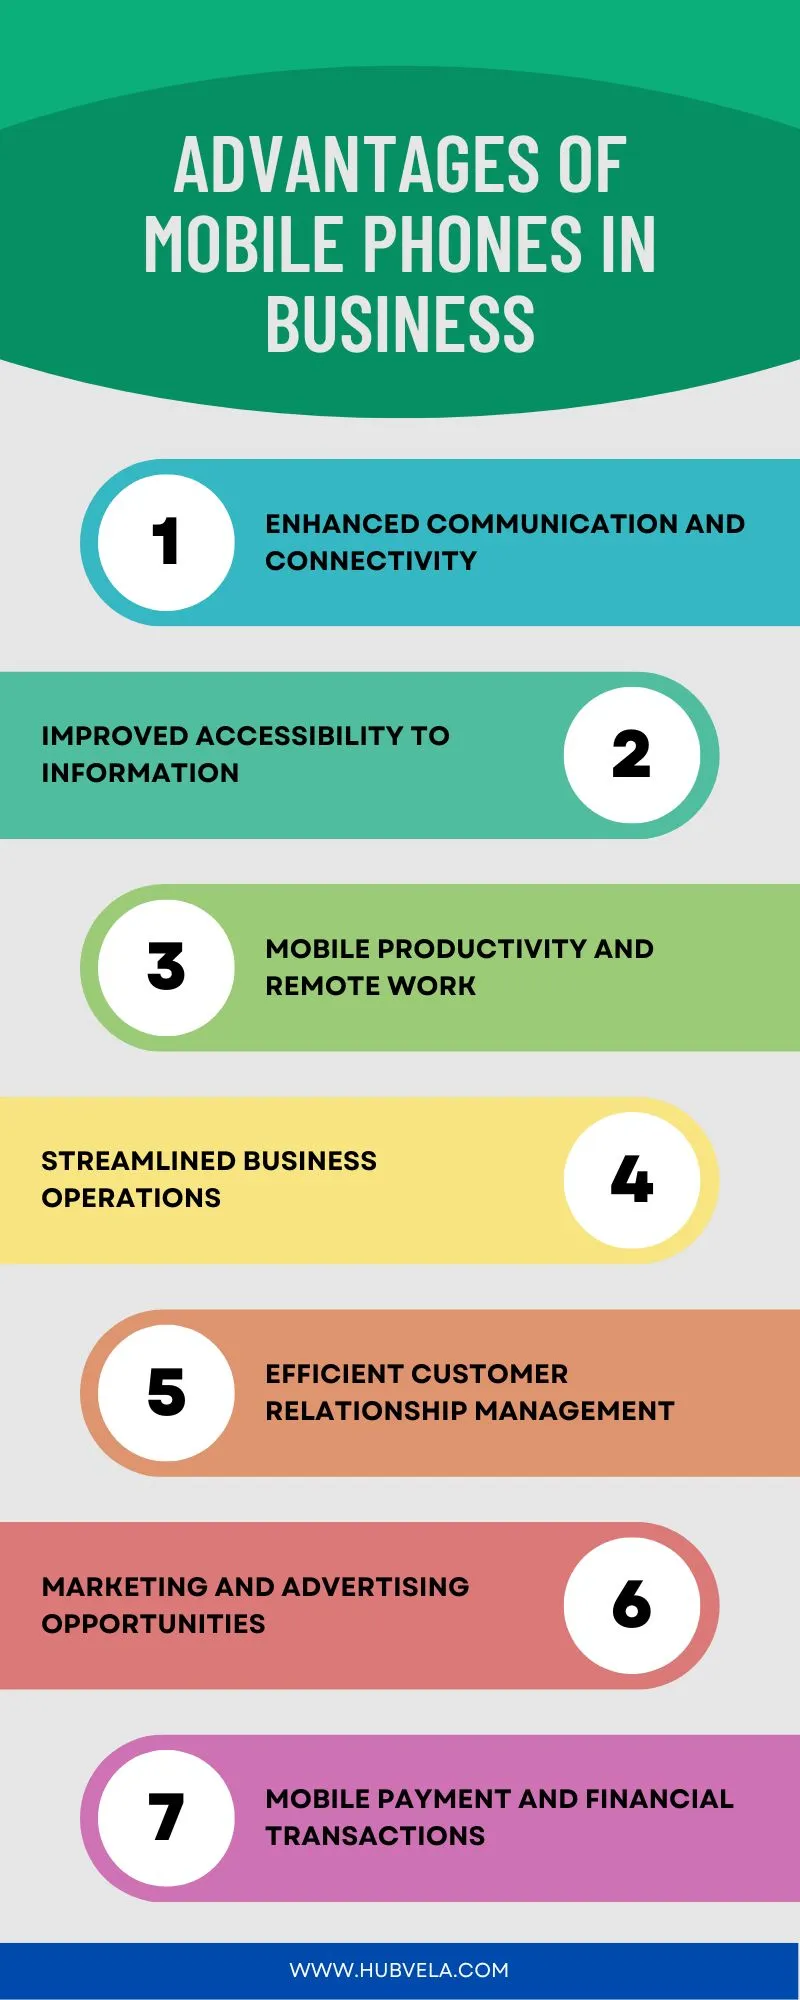 Advantages of Mobile Phones in Business Infographic